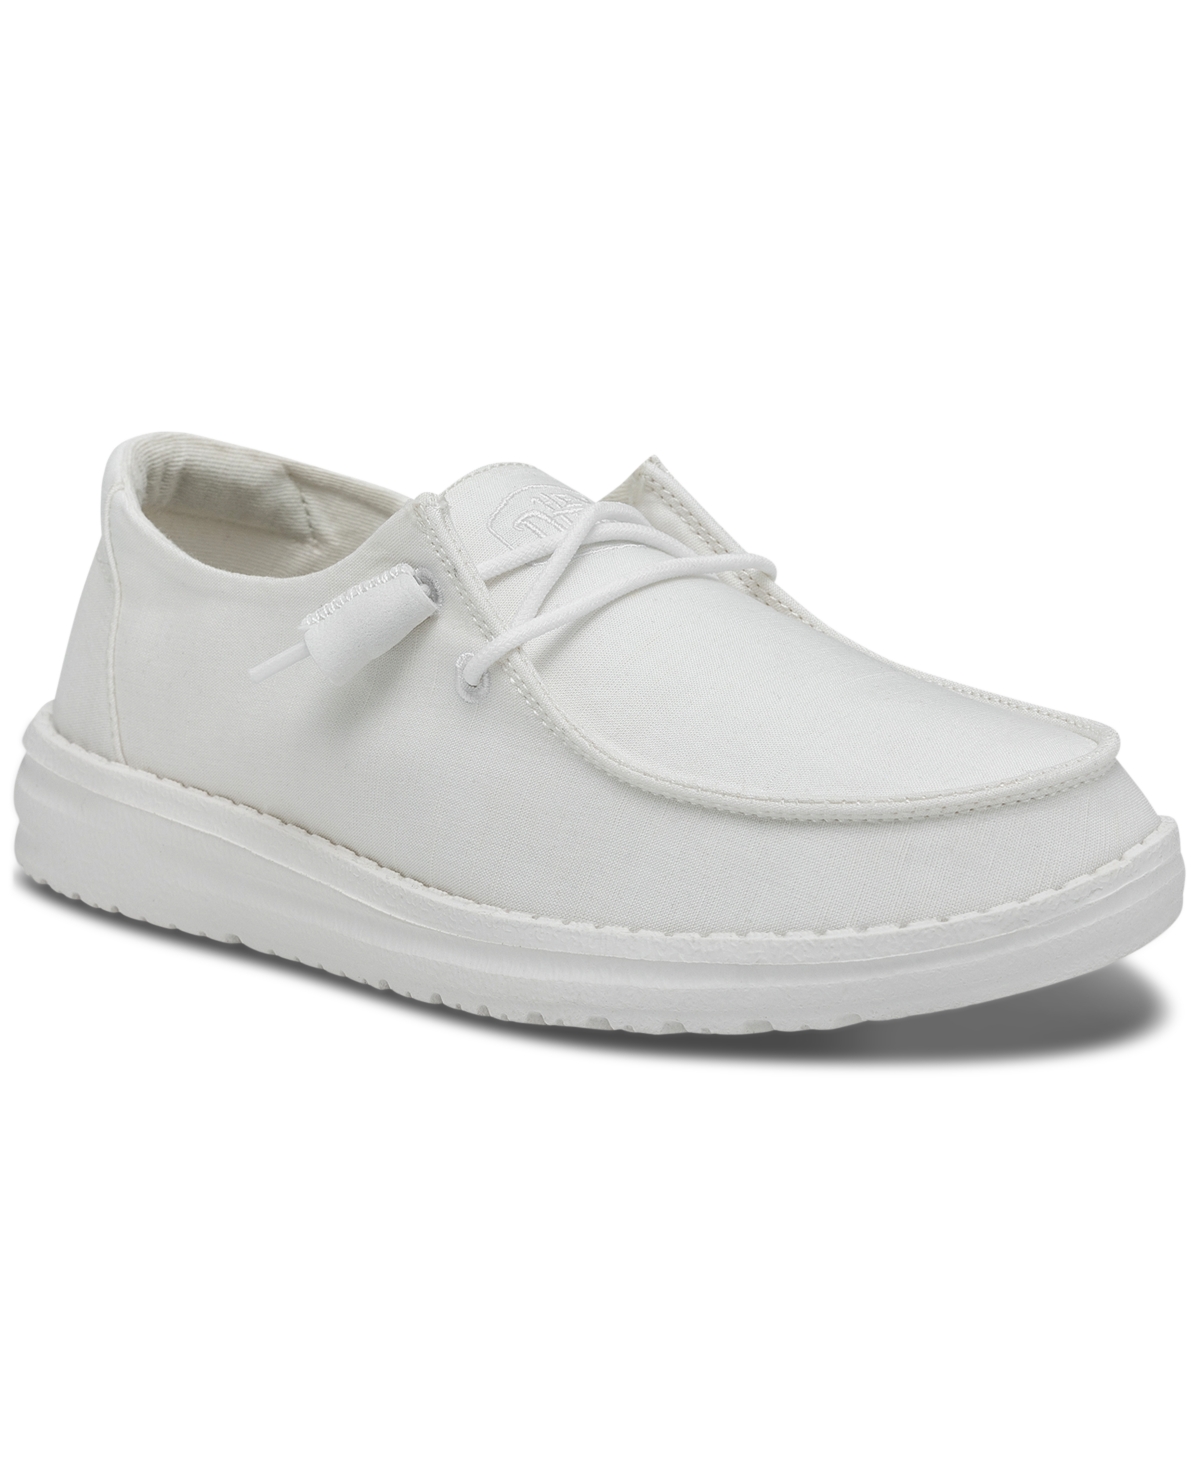 Women's Wendy Slub Canvas Casual Moccasin Sneakers from Finish Line - White